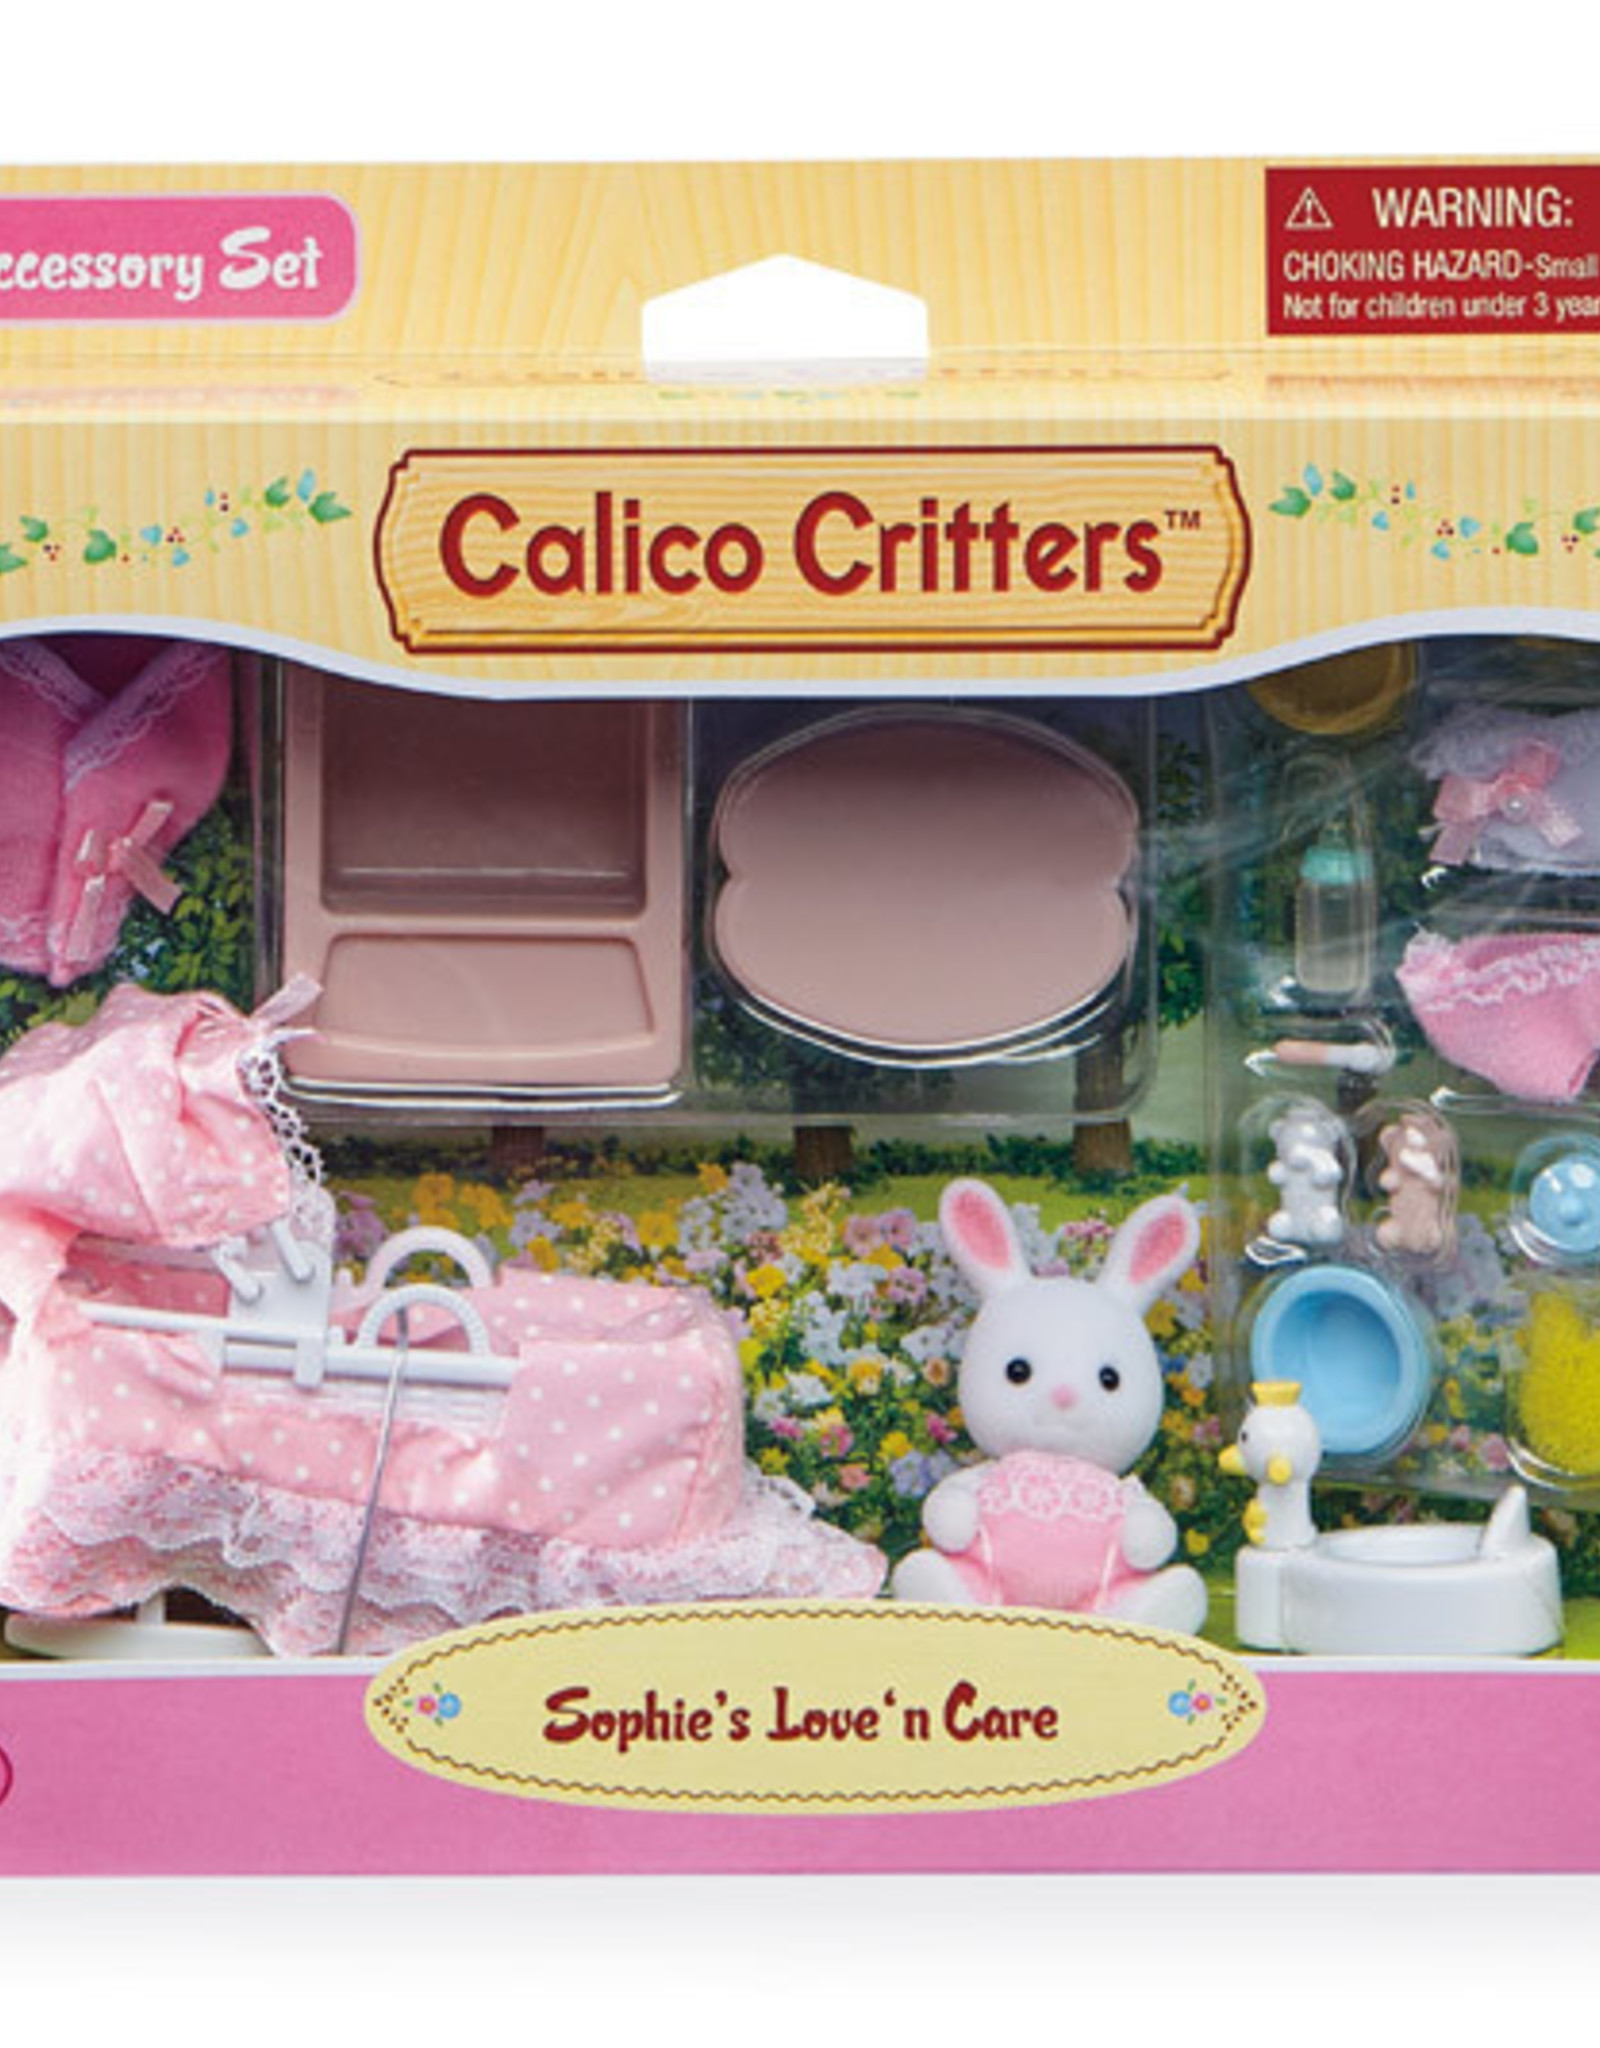 Calico Critters CC Sophie's Love 'n Care Set